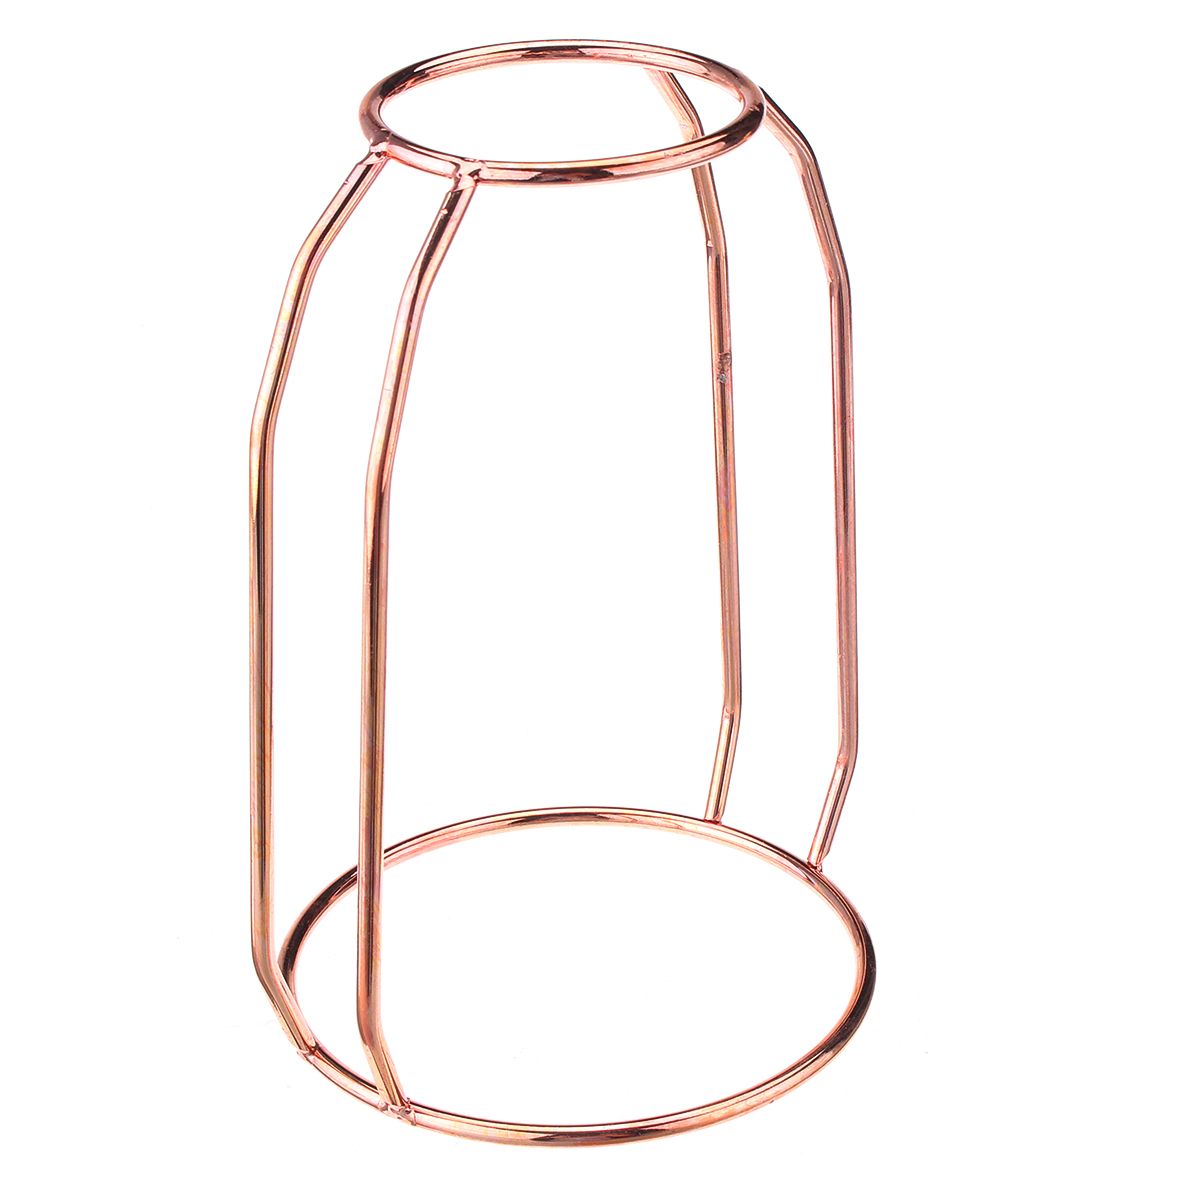 Glass-Vase-Flower-Holder-Plant-Container-Metal-Line-for-Decorations-1450433